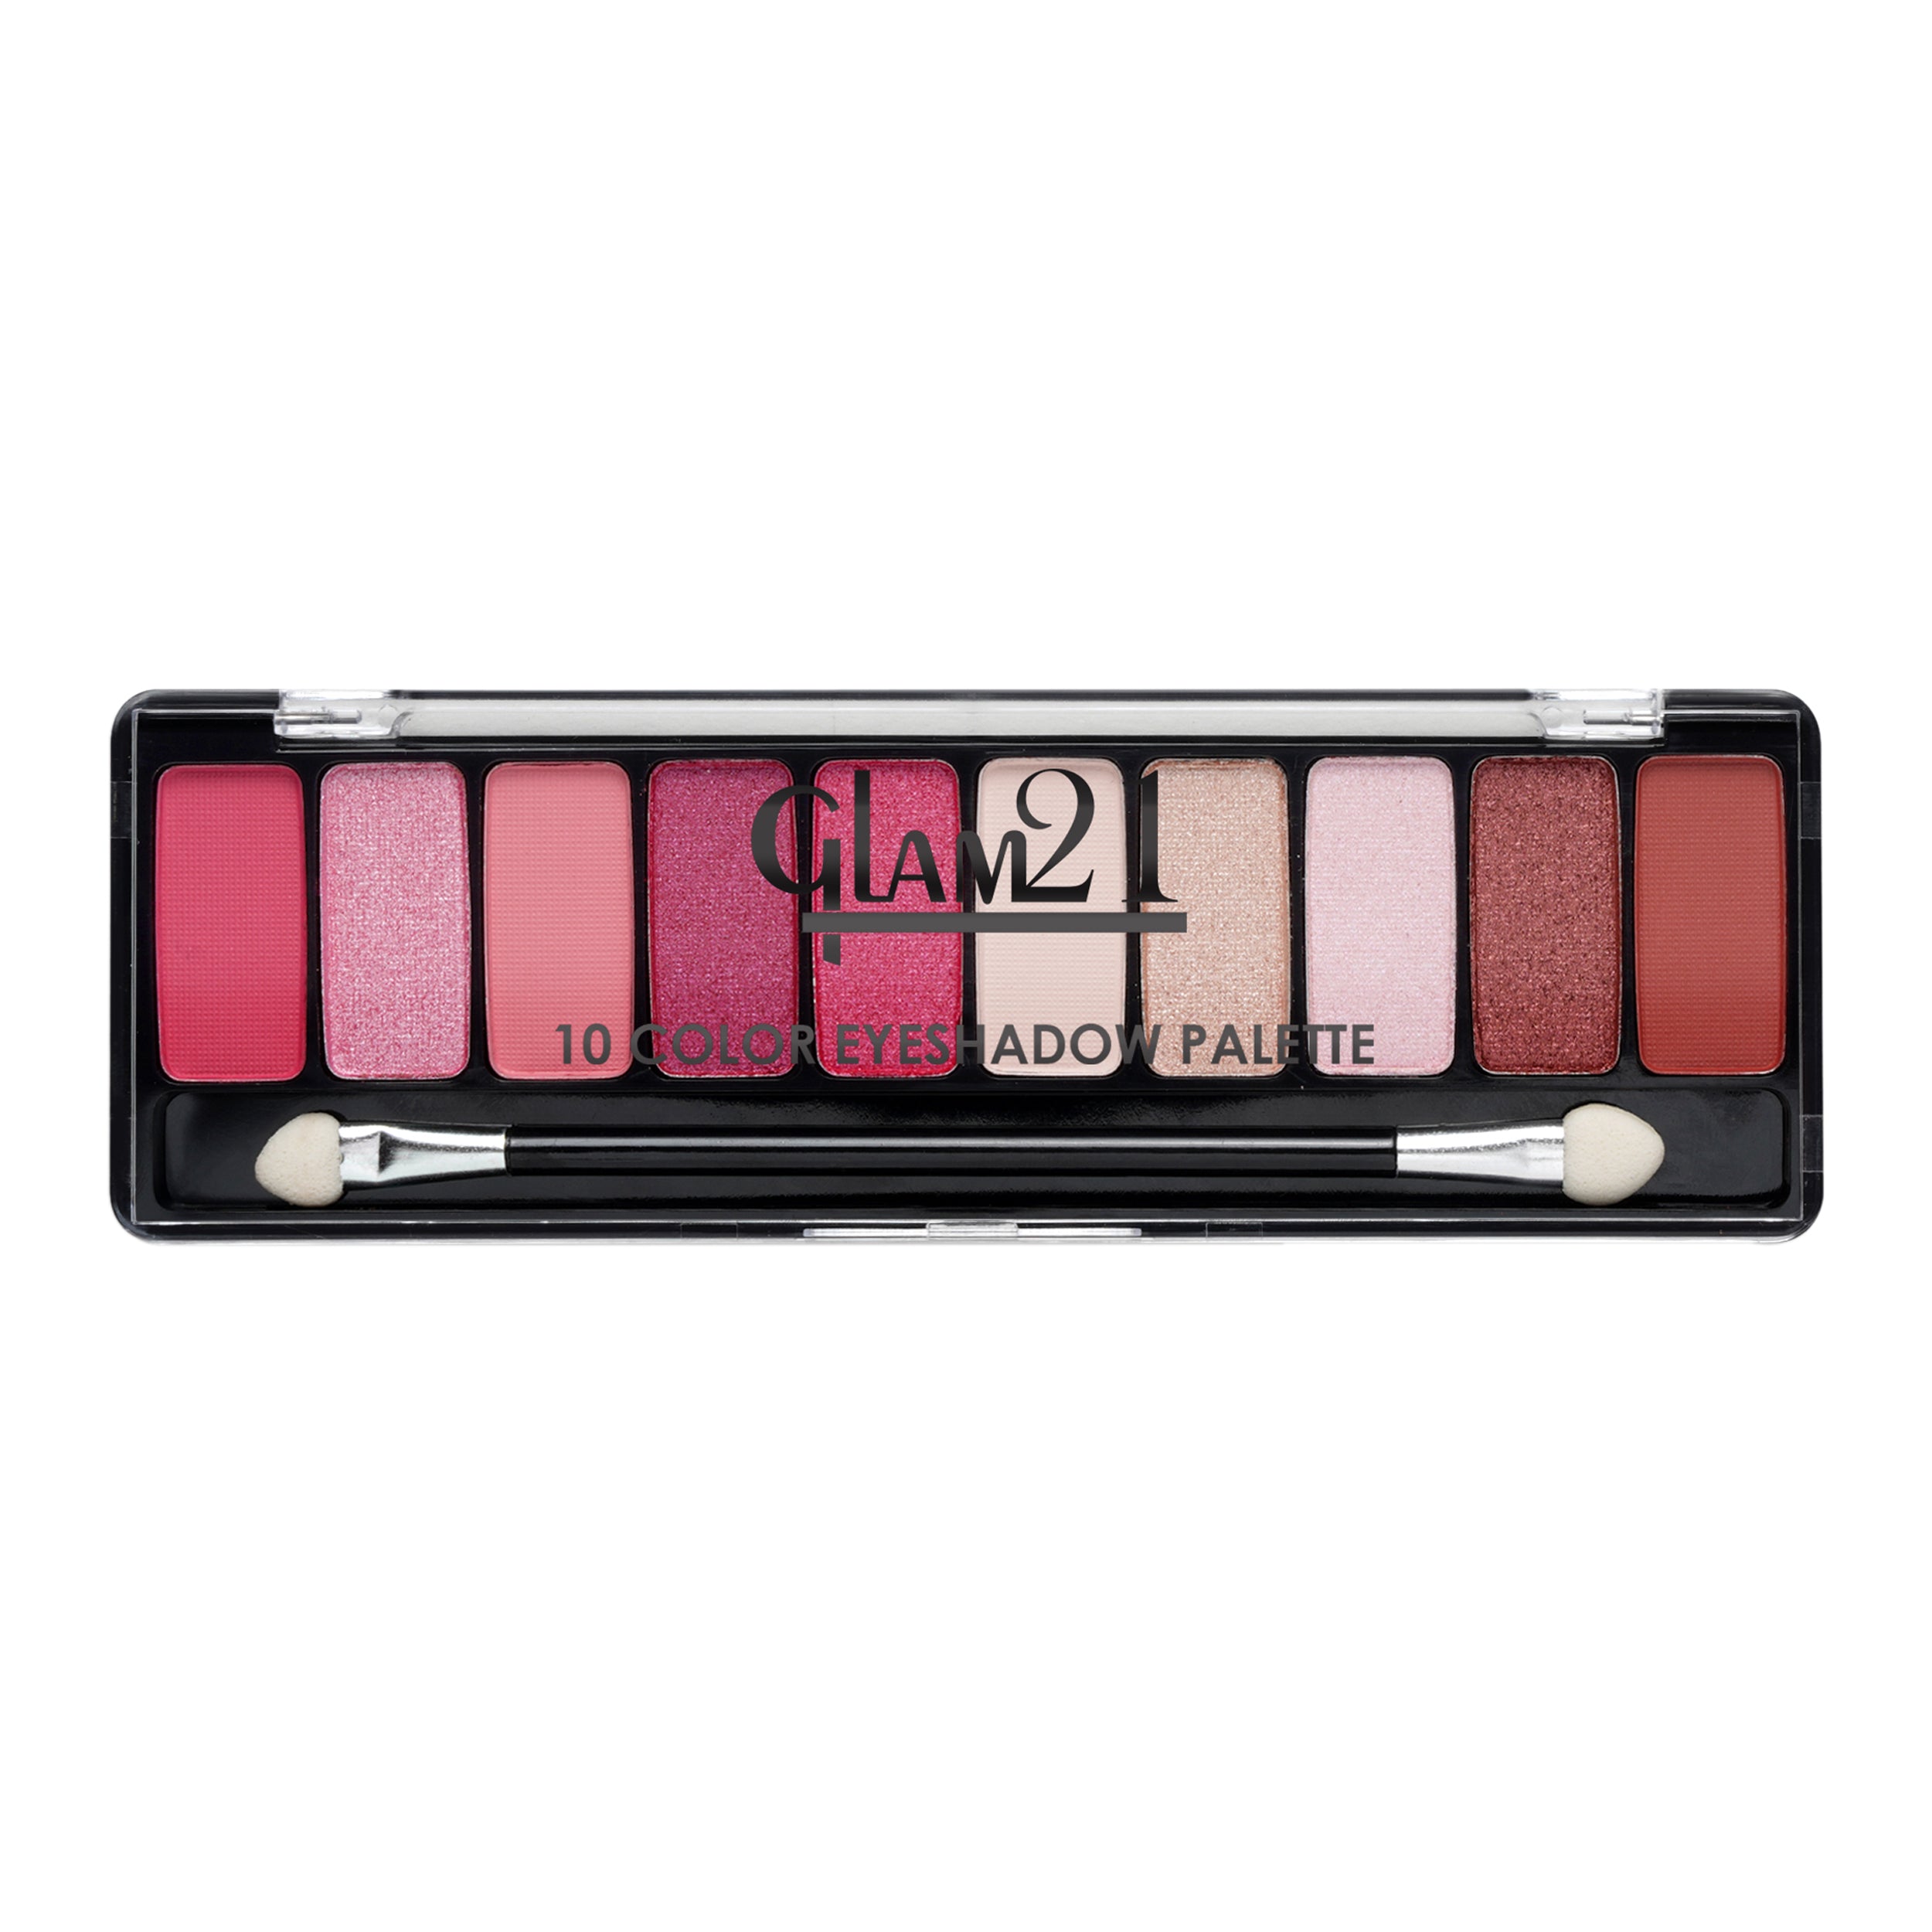 Glam21 10 Color Eyeshadow Palette - Soft Matte & Creamy Shimmer in Just One Swipe 8.8 g (Shade-04)